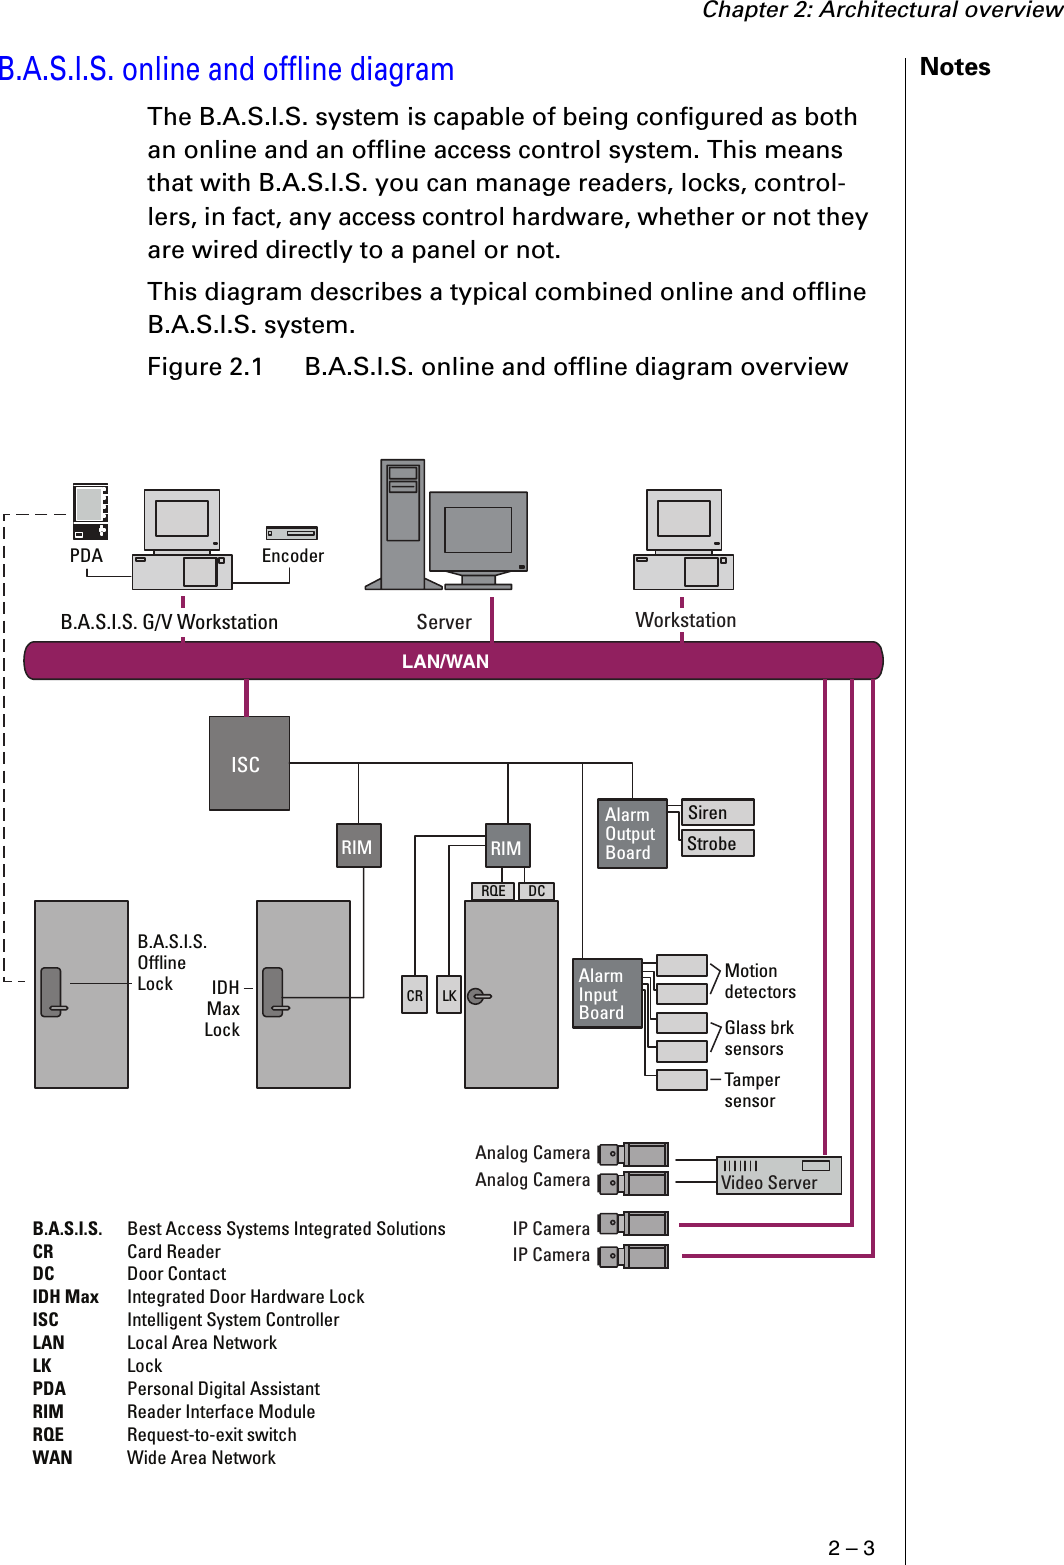 Chapter 2: Architectural overview2 – 3NotesB.A.S.I.S. online and offline diagramThe B.A.S.I.S. system is capable of being configured as both an online and an offline access control system. This means that with B.A.S.I.S. you can manage readers, locks, control-lers, in fact, any access control hardware, whether or not they are wired directly to a panel or not.This diagram describes a typical combined online and offline B.A.S.I.S. system.Figure 2.1  B.A.S.I.S. online and offline diagram overview LAN/WANServer WorkstationISCAlarmOutput BoardAlarmInput BoardVideo ServerAnalog CameraAnalog CameraIP CameraIP CameraIDHMax LockB.A.S.I.S. Offline LockEncoderB.A.S.I.S. G/V WorkstationPDACR LKMotion detectorsGlass brk sensorsTamper sensorStrobeSirenRIM RIMDCRQEB.A.S.I.S.  Best Access Systems Integrated SolutionsCR  Card ReaderDC  Door ContactIDH Max  Integrated Door Hardware LockISC  Intelligent System ControllerLAN  Local Area NetworkLK  LockPDA  Personal Digital AssistantRIM  Reader Interface ModuleRQE  Request-to-exit switchWAN  Wide Area Network